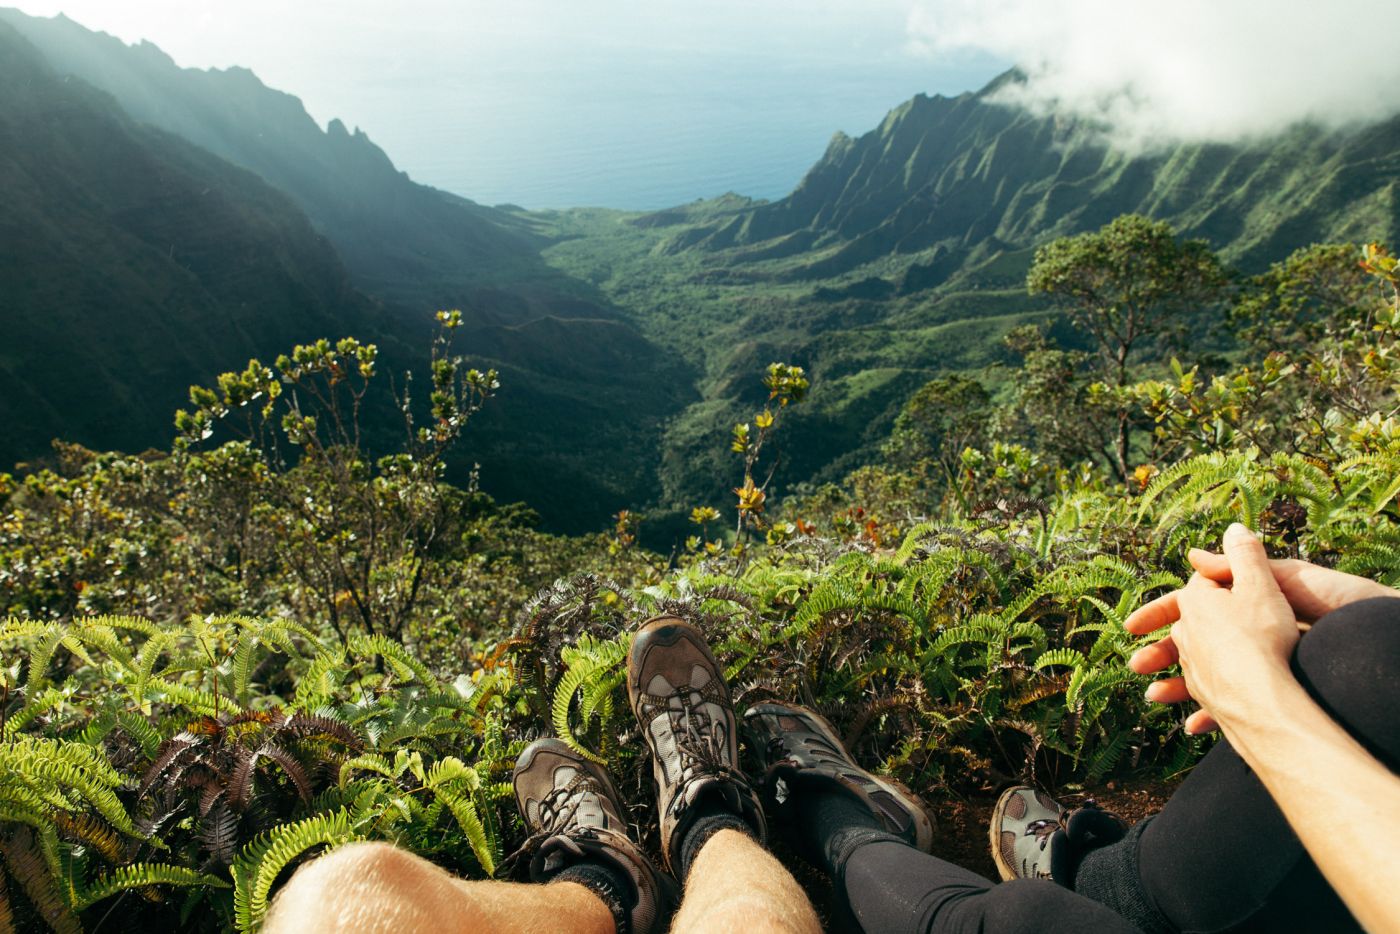 Feet in front of Kalalau Valley seen from above, Koke'e State Park, Kaua'i, Hawaii